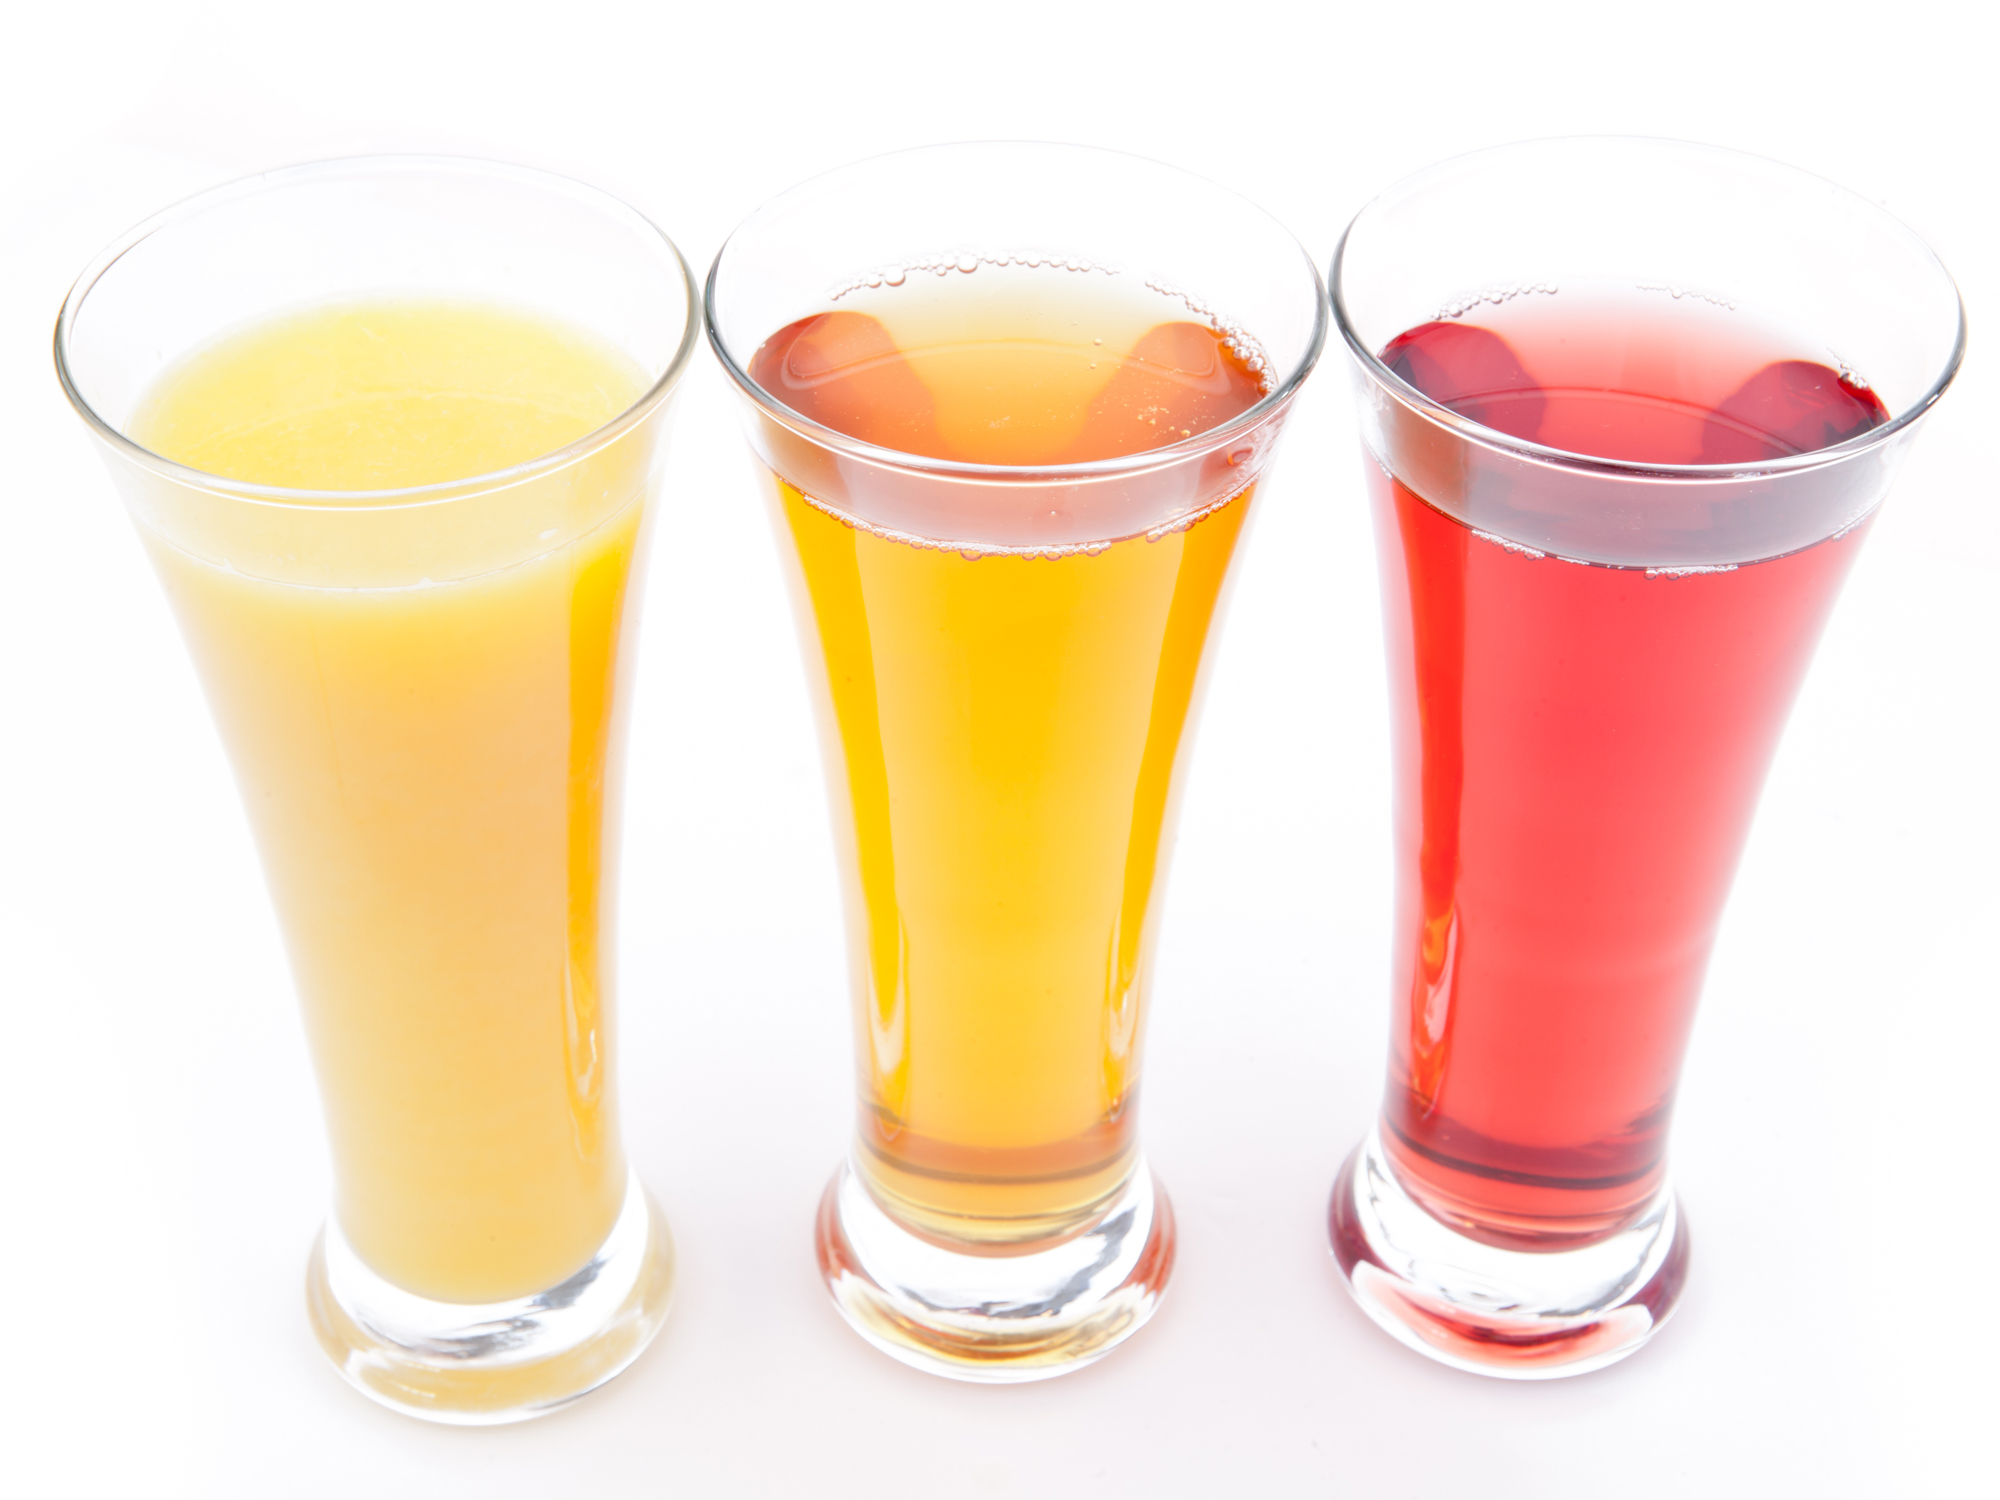 3 drinks that energize without the jitters